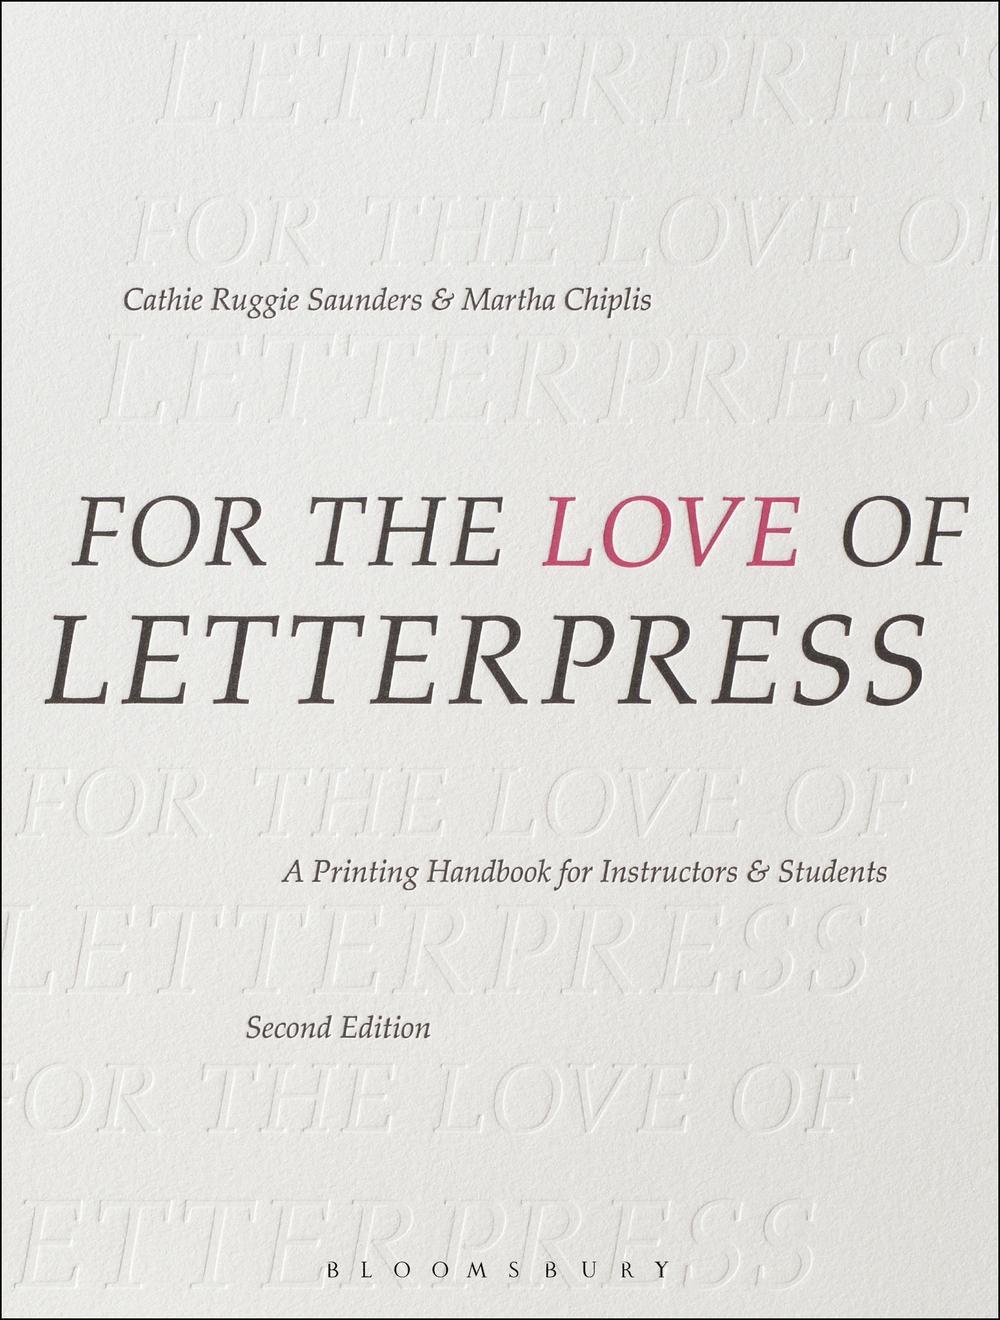 For the Love of Letterpress - Cathie Ruggie Saunders